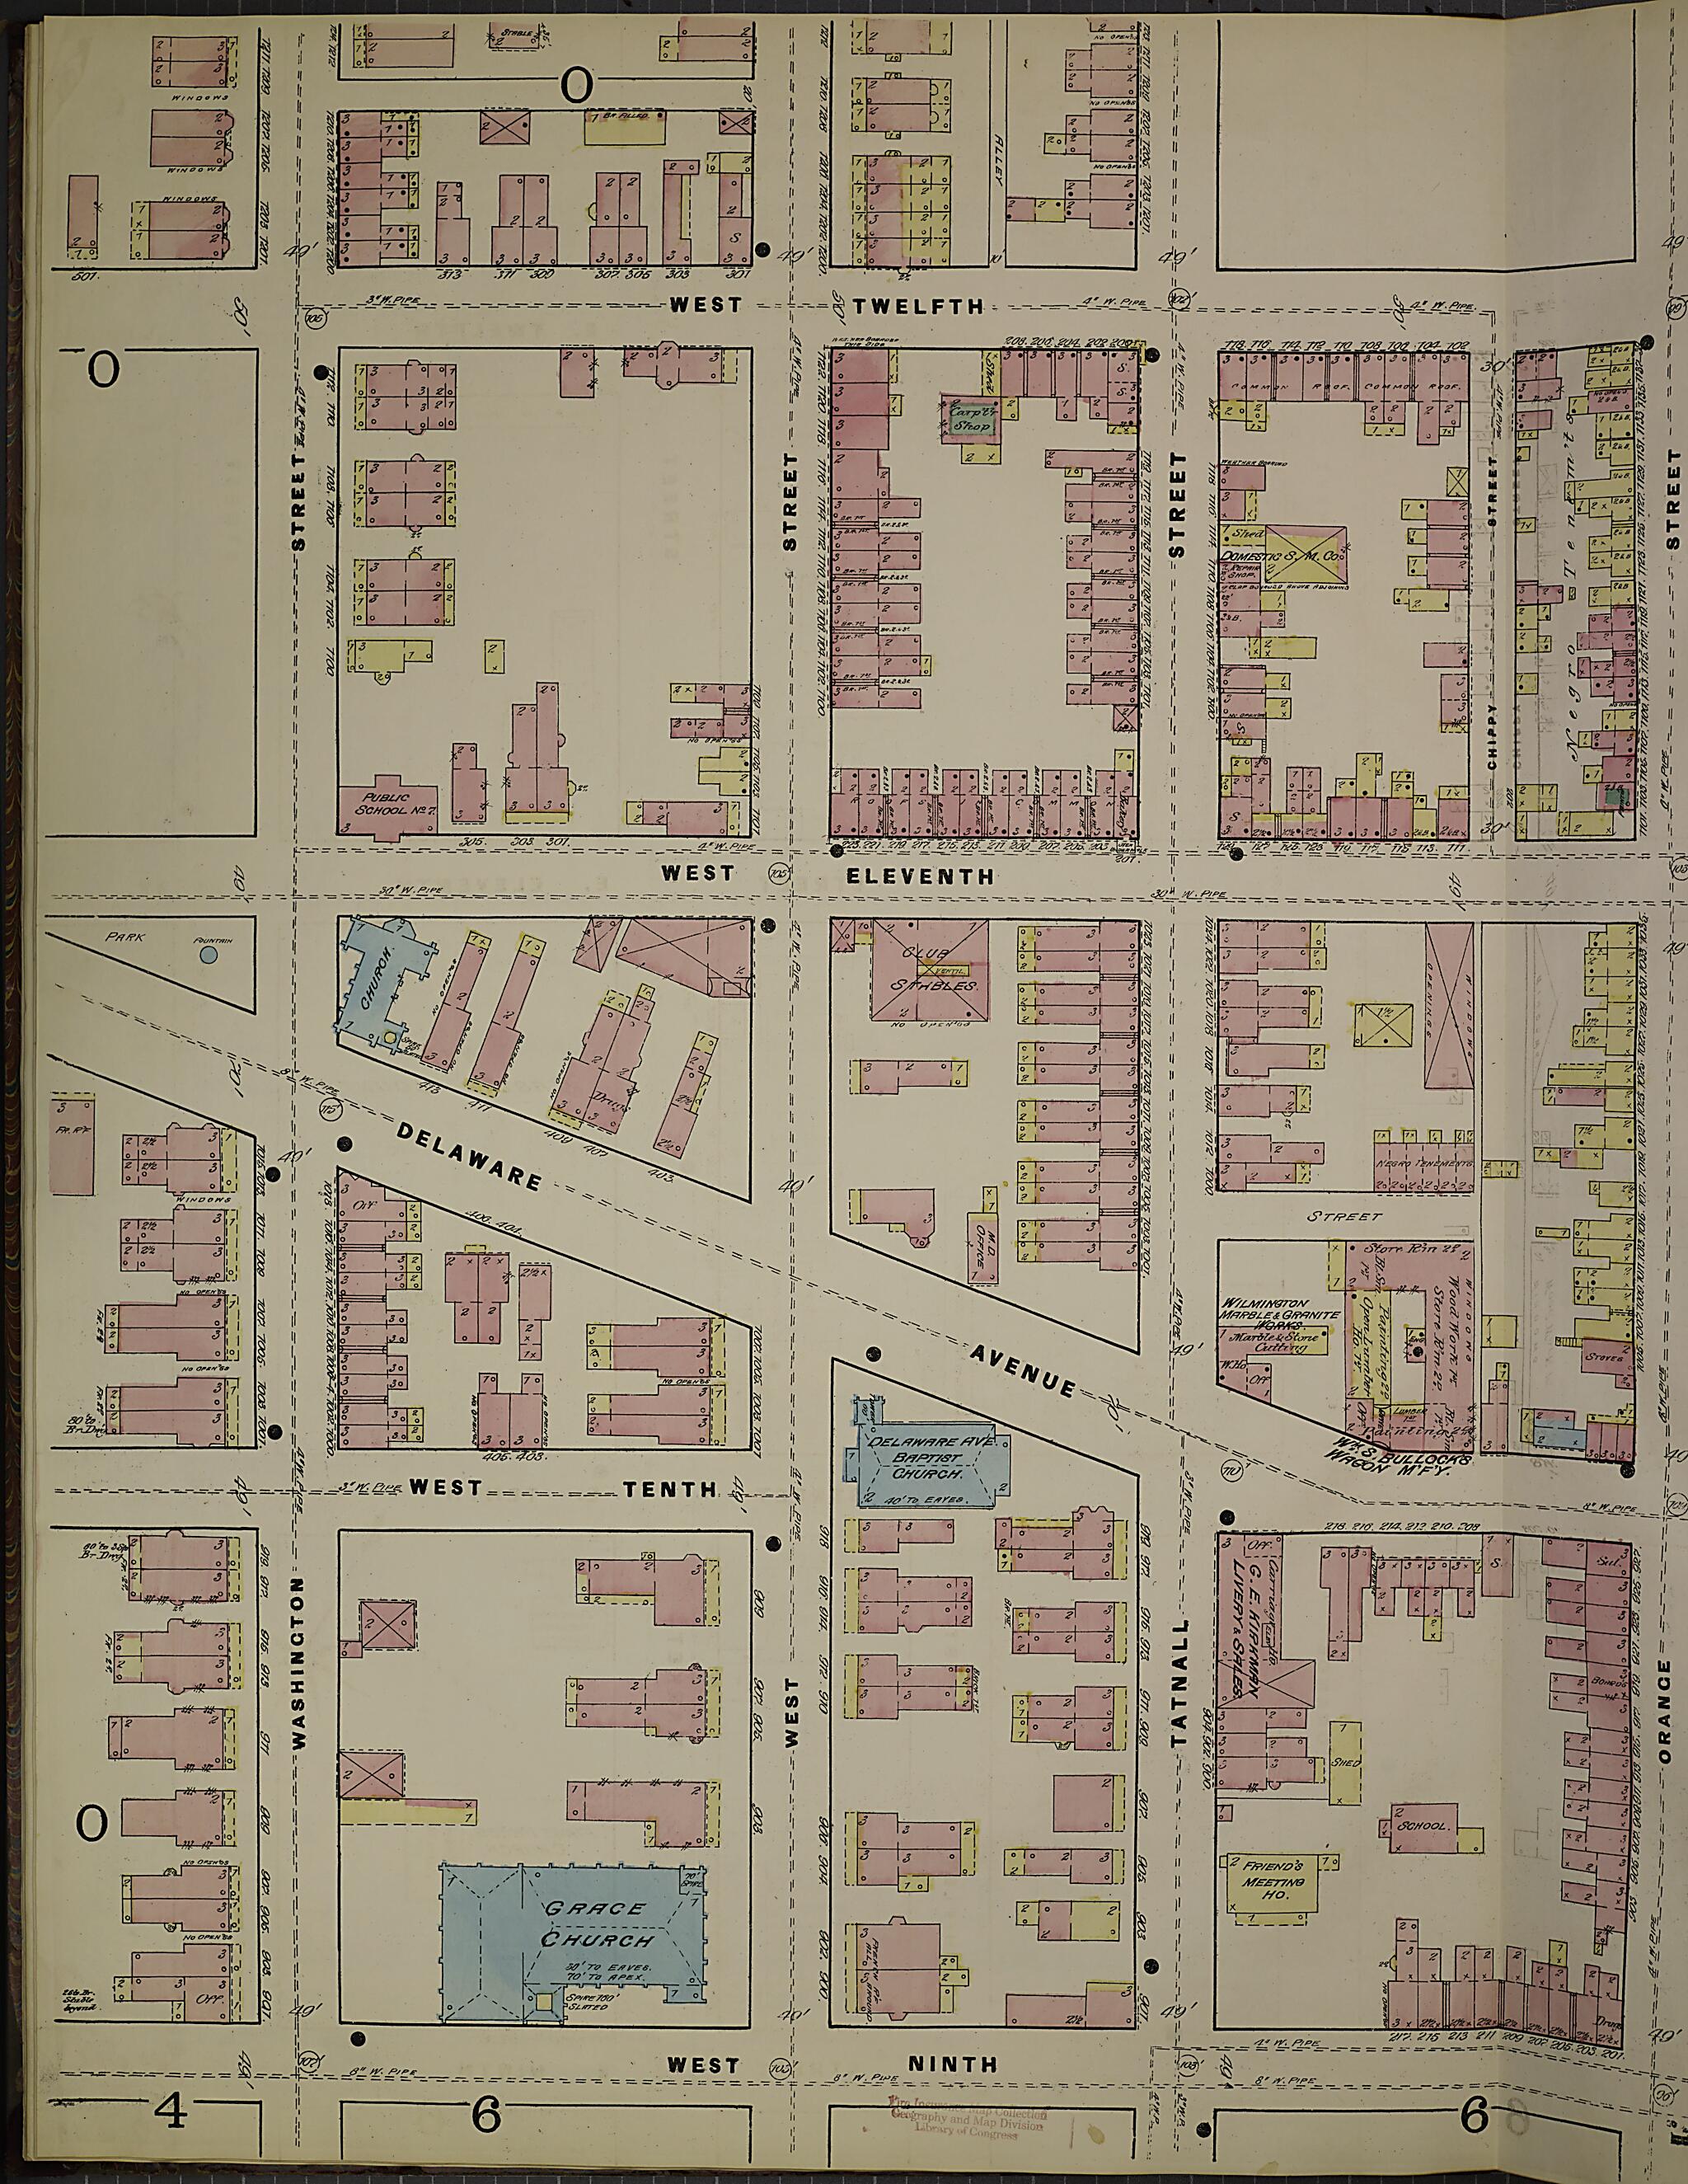 This old map of Wilmington, New Castle County, Delaware was created by Sanborn Map Company in 1884